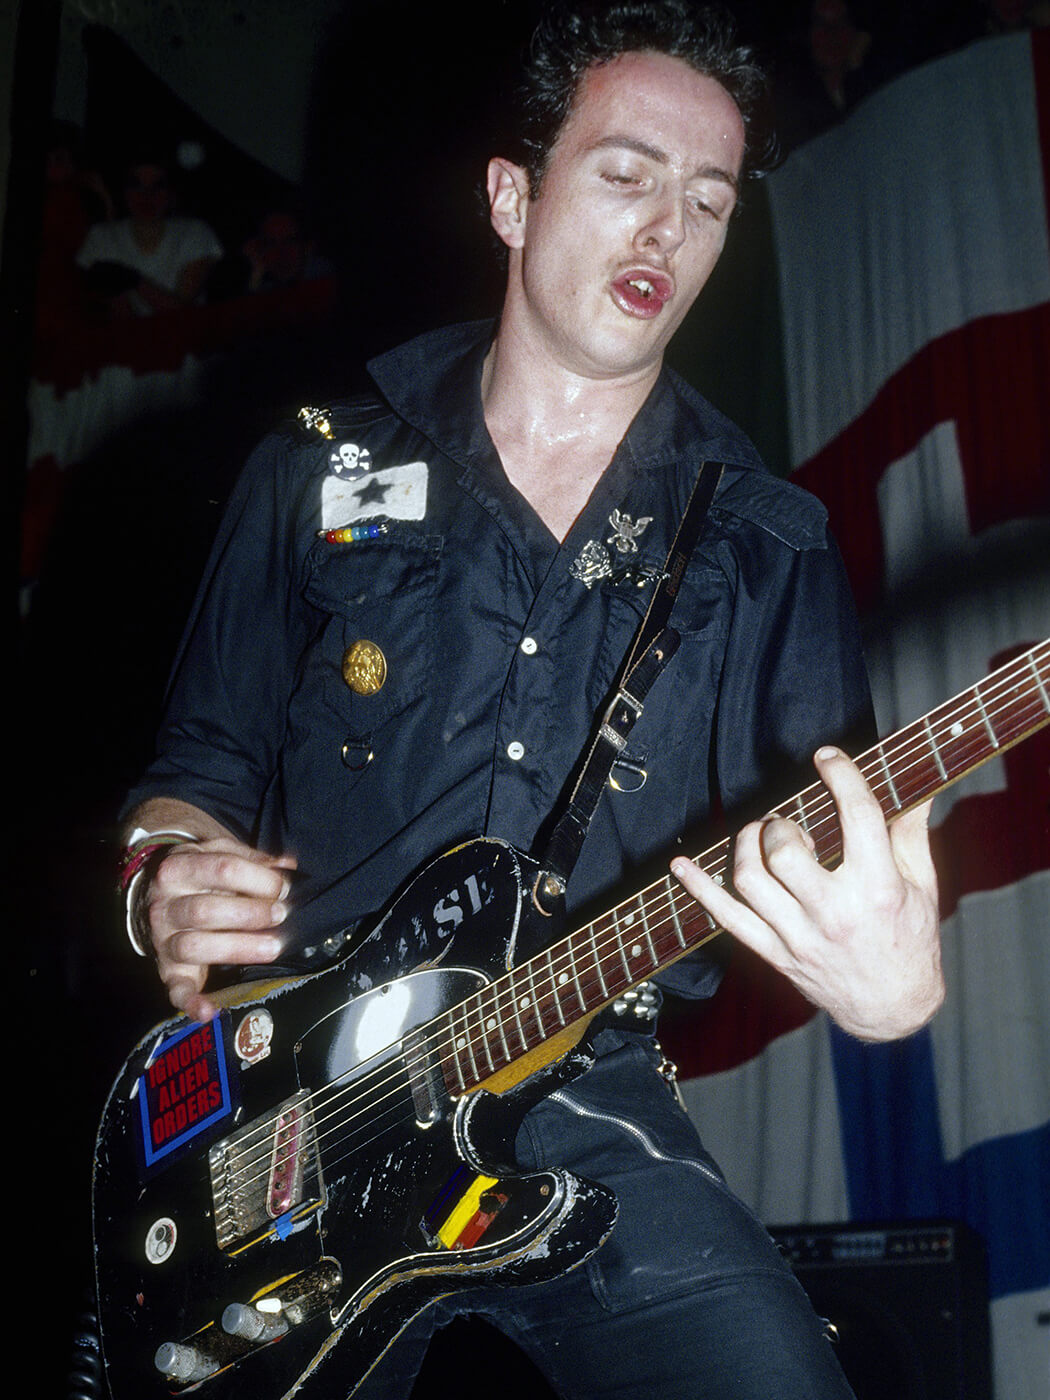 Joe Strummer of The Clash performing with his iconic Telecaster in 1979, photo by Larry Hulst/Michael Ochs Archives via Getty Images